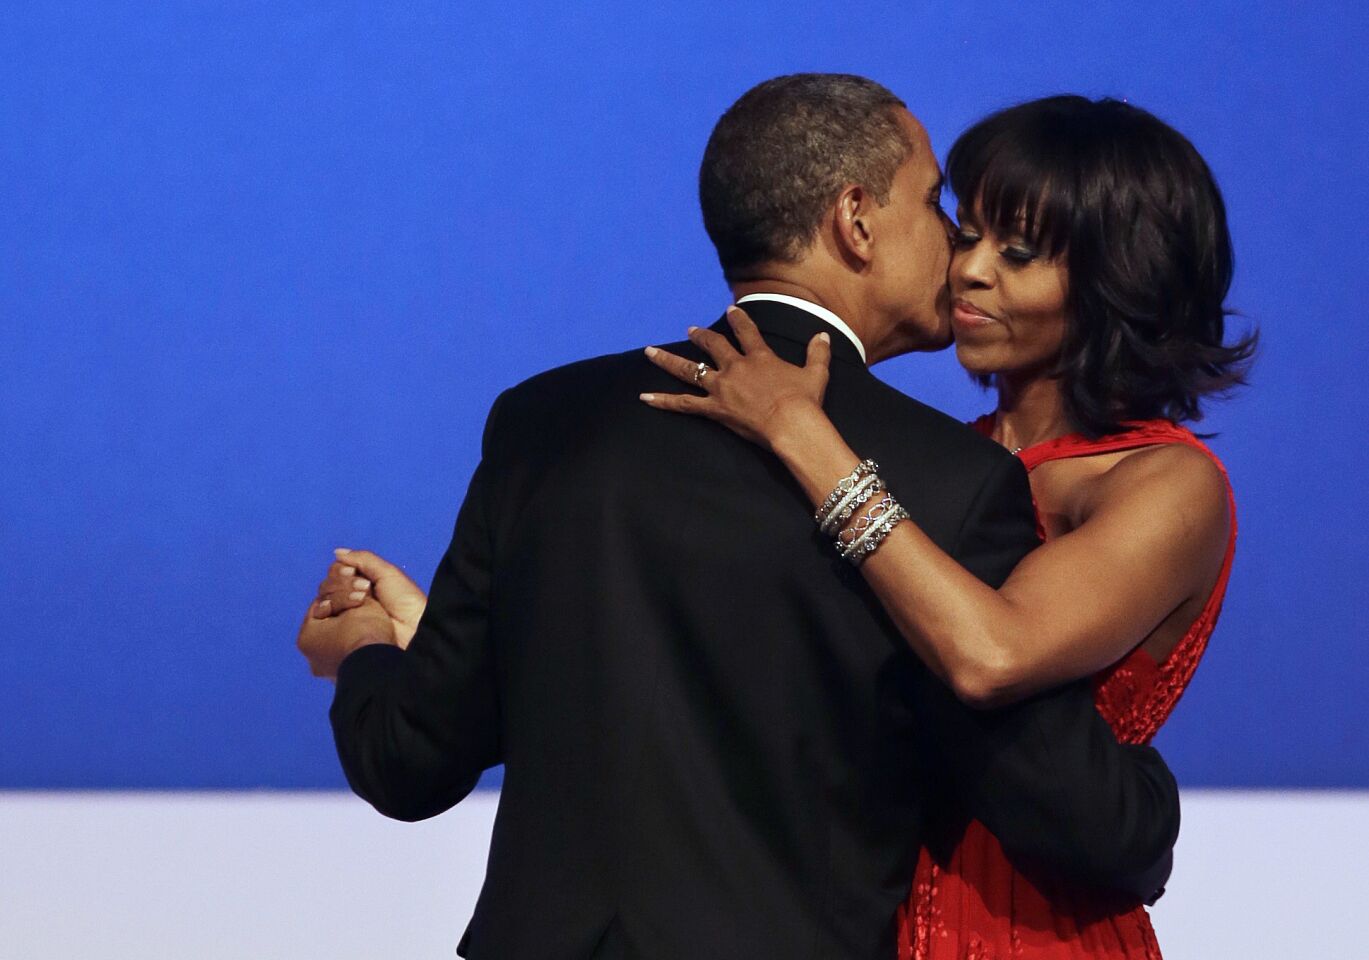 President Obama kisses First Lady Michelle Obama during their dance at the Commander-in-Chief Inaugural Ball at the Washington Convention Center.